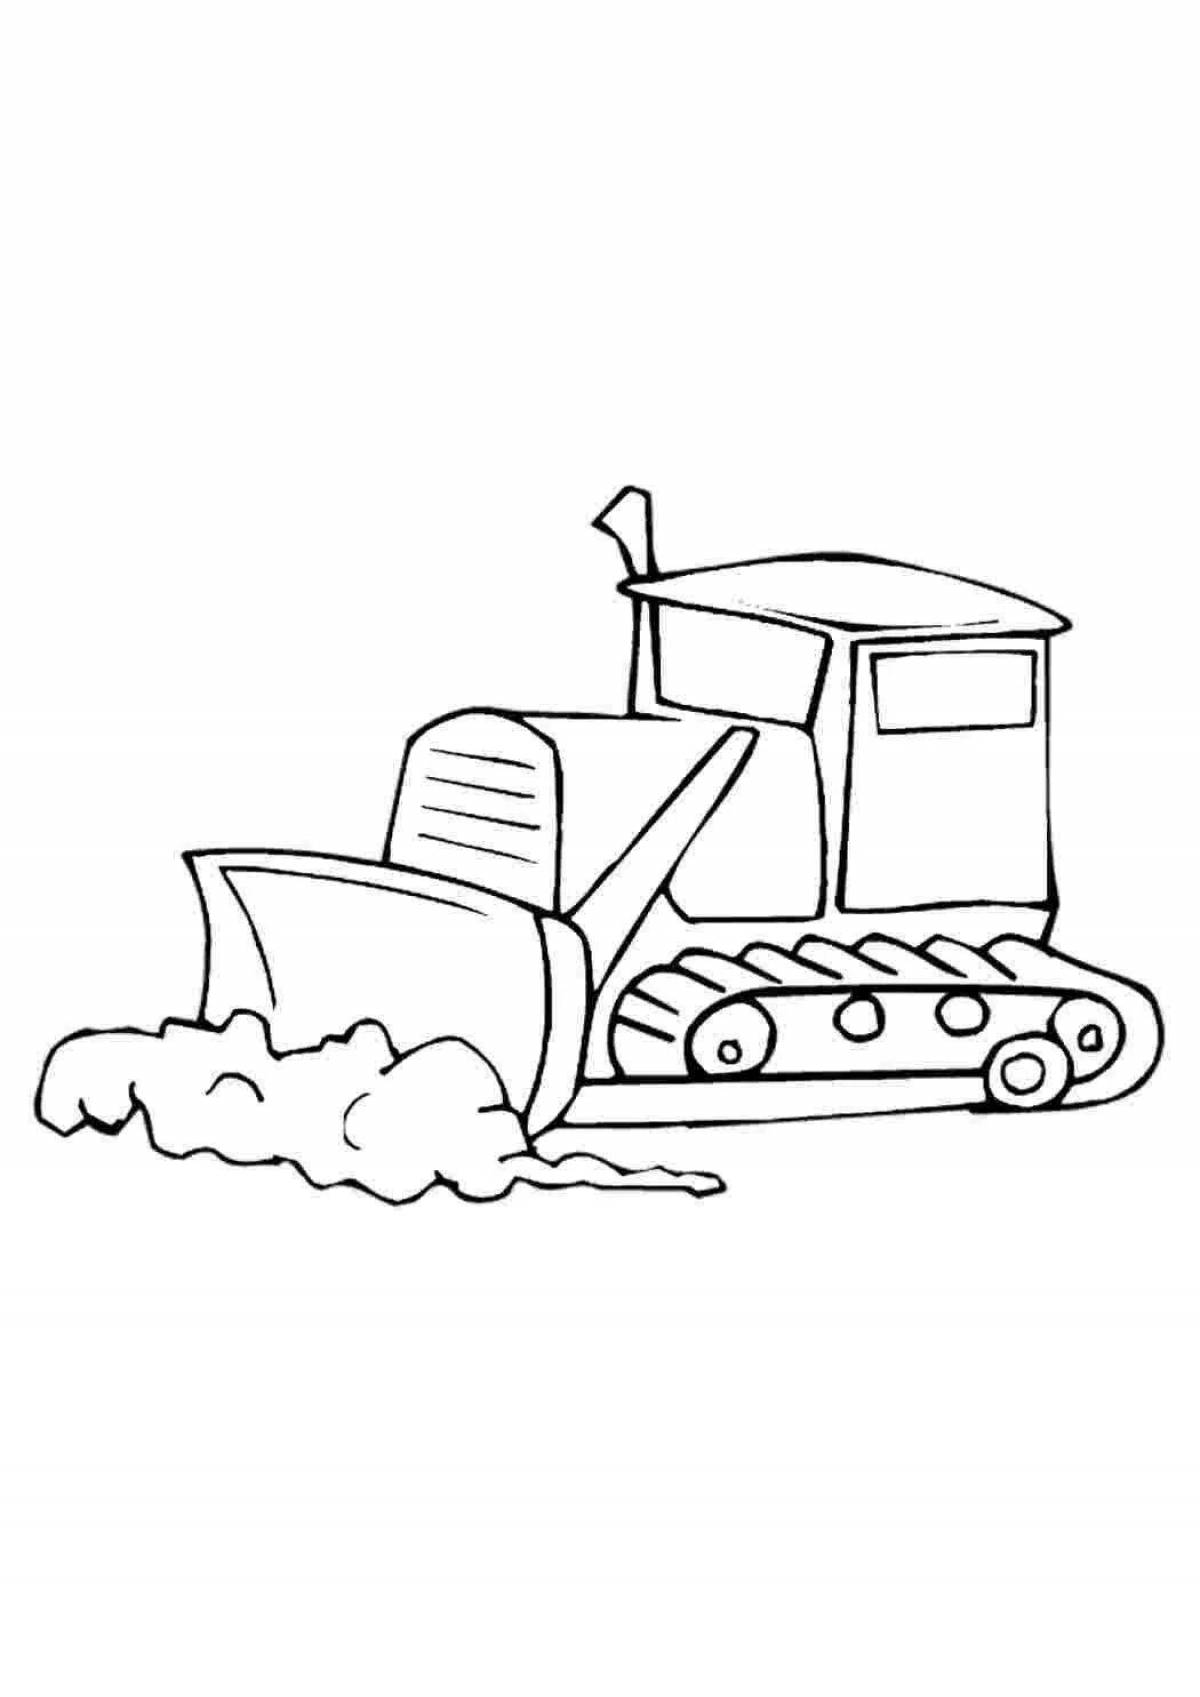 Tractor clearing snow #18